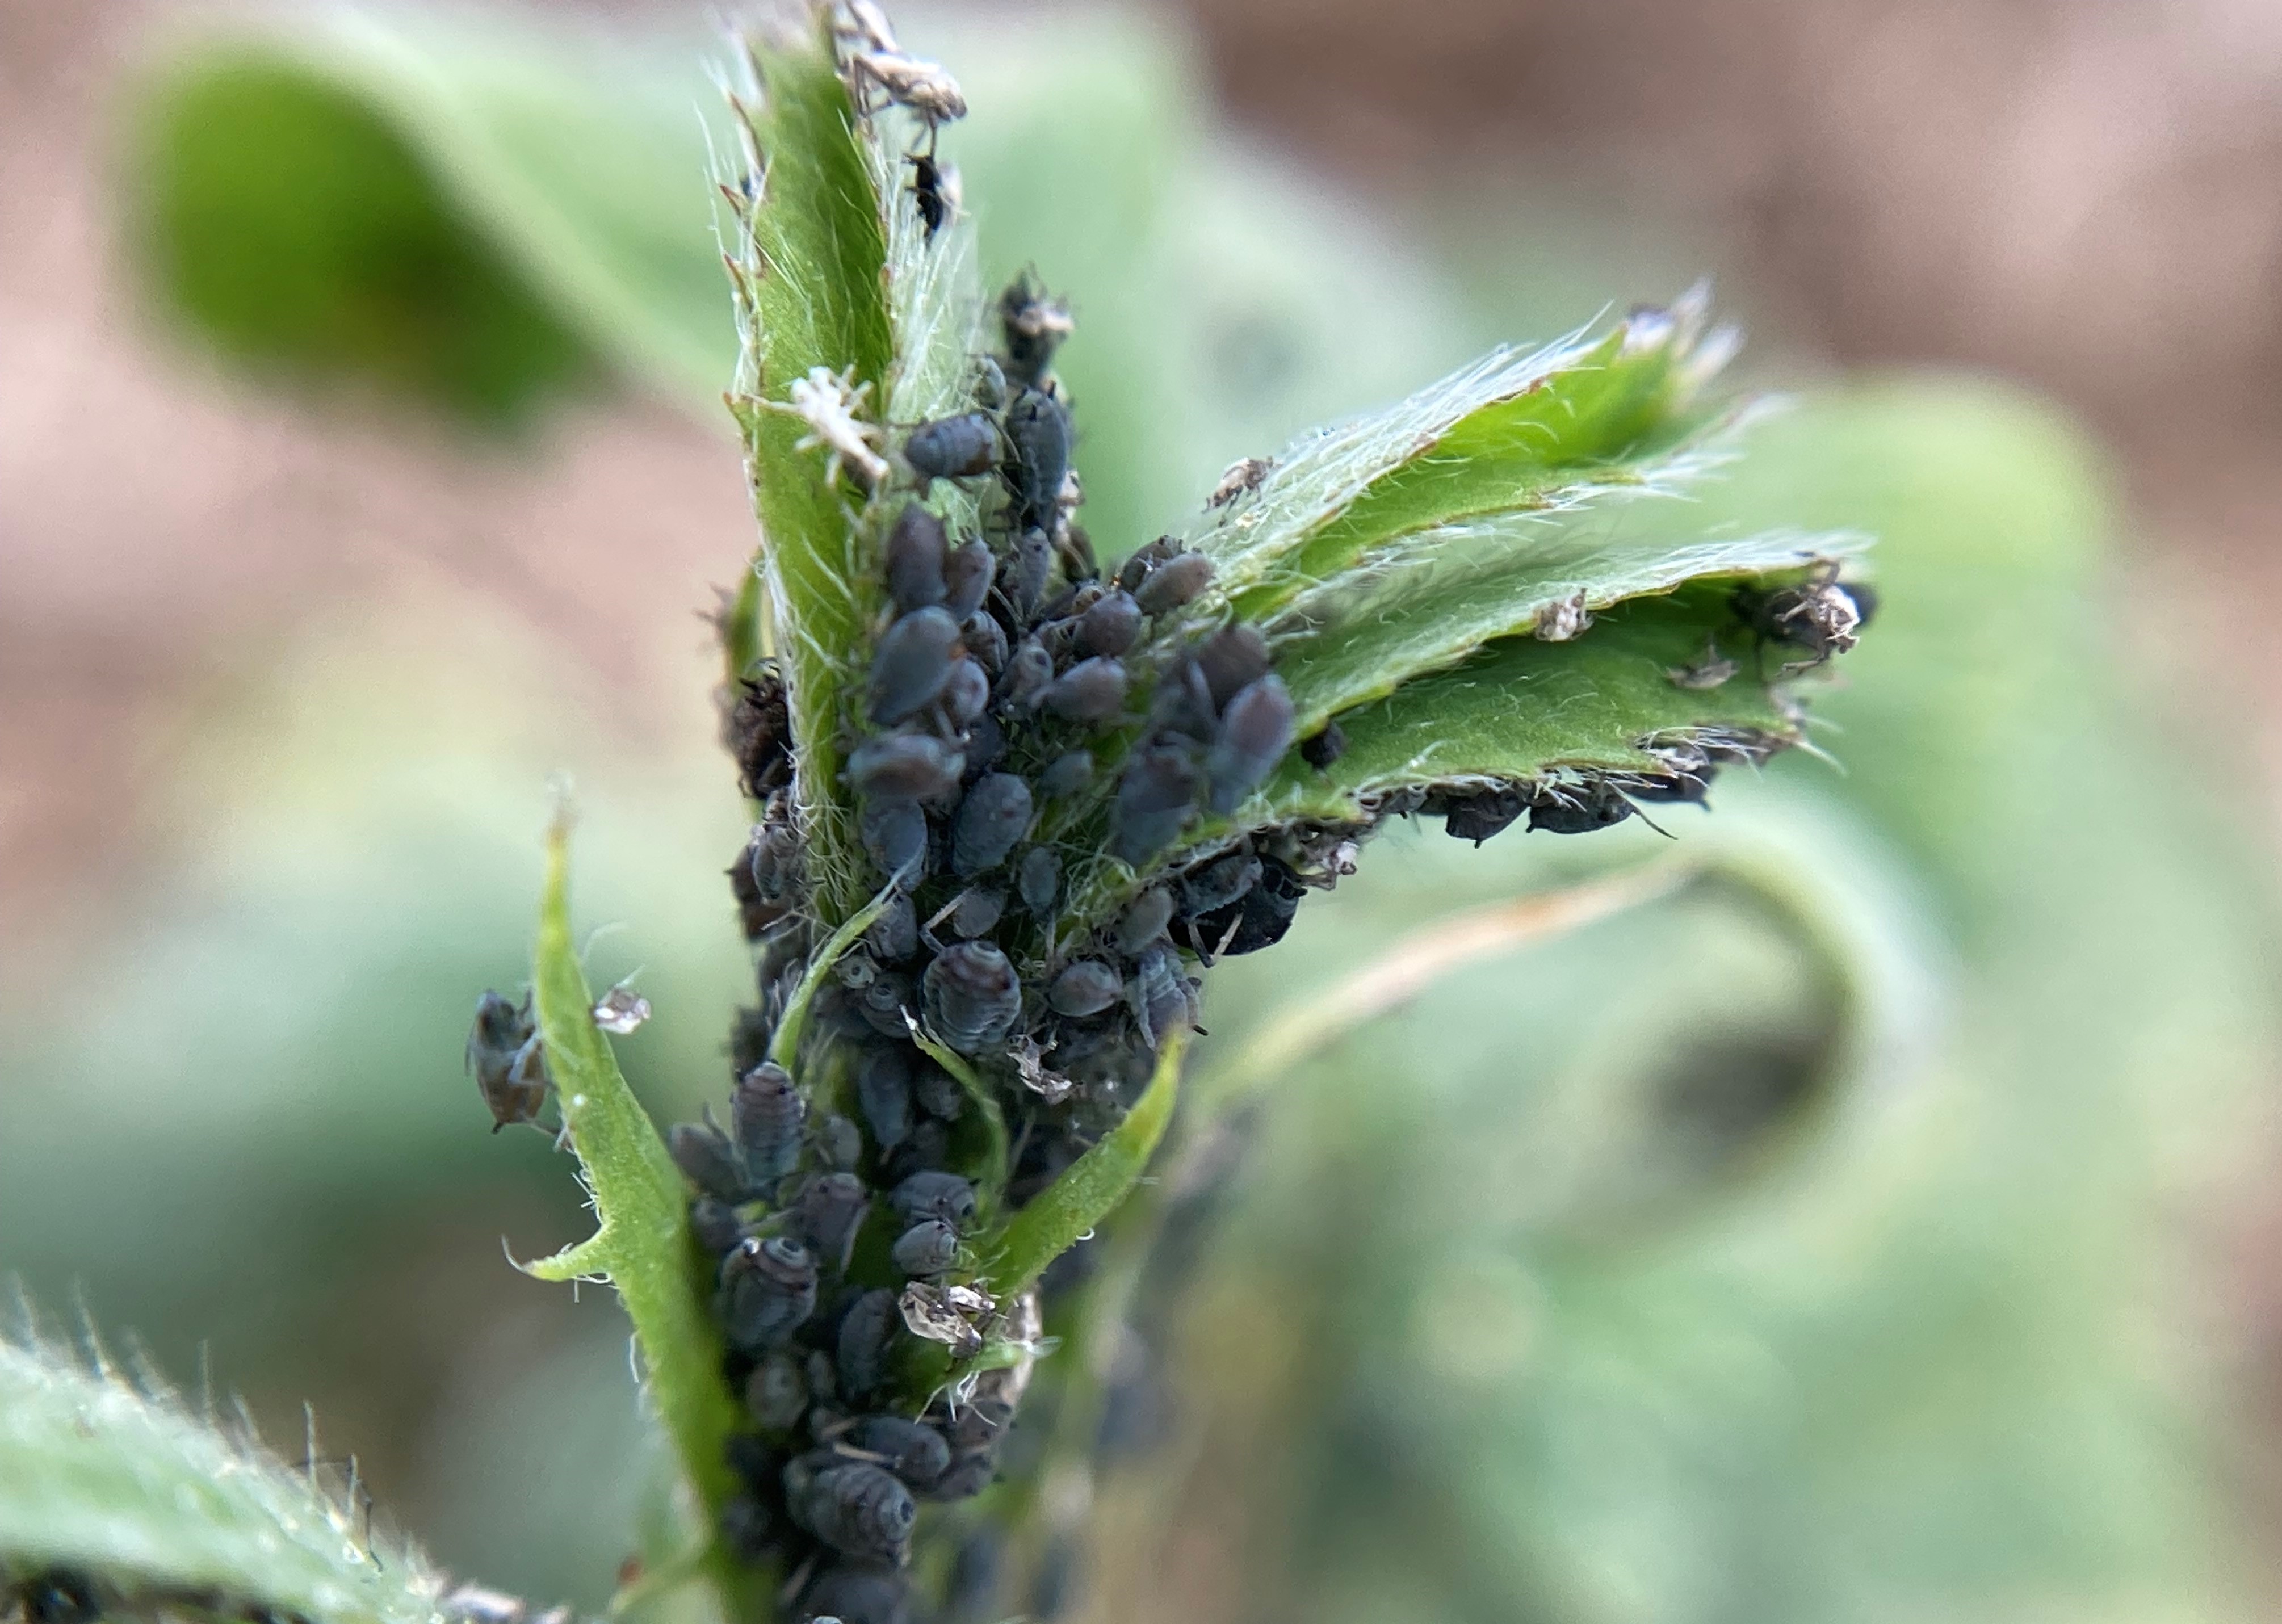 Close up image of Cowpea aphids covering a branch of lucerne